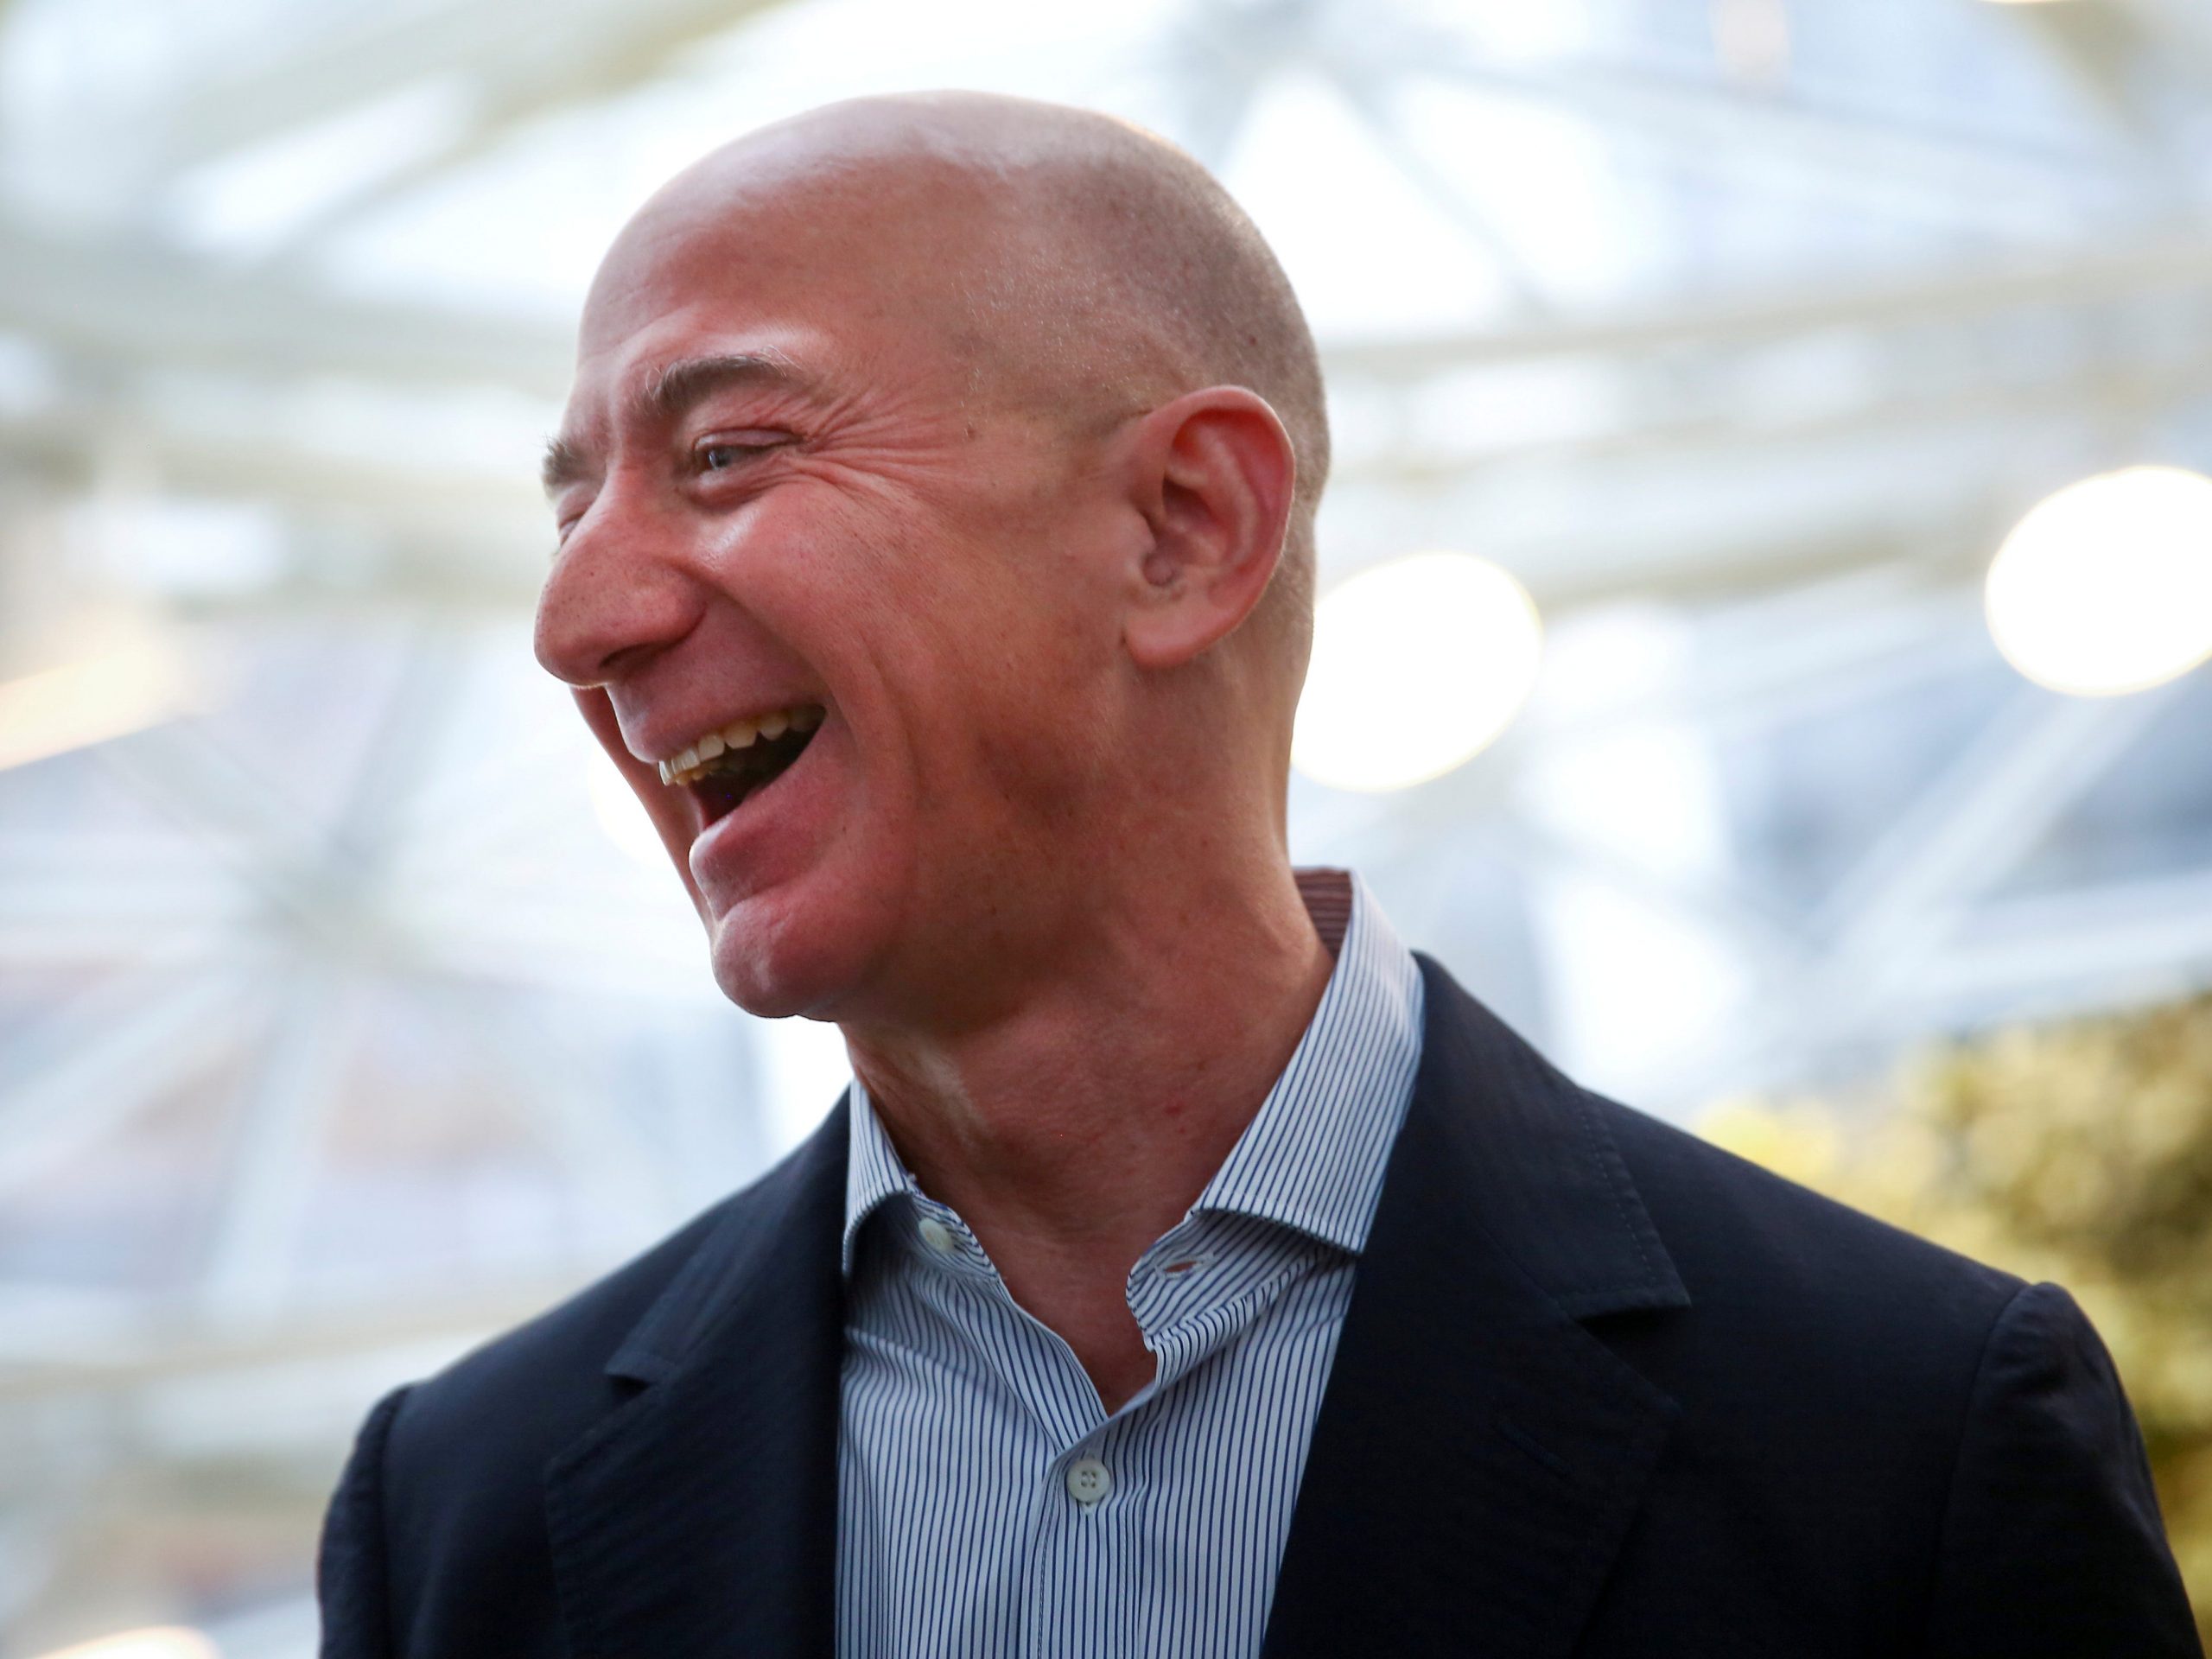 FILE PHOTO: Amazon founder and CEO Jeff Bezos laughs as he talks to the media while touring the new Amazon Spheres during the grand opening at Amazon's Seattle headquarters in Seattle, Washington, U.S., January 29, 2018.   REUTERS/Lindsey Wasson